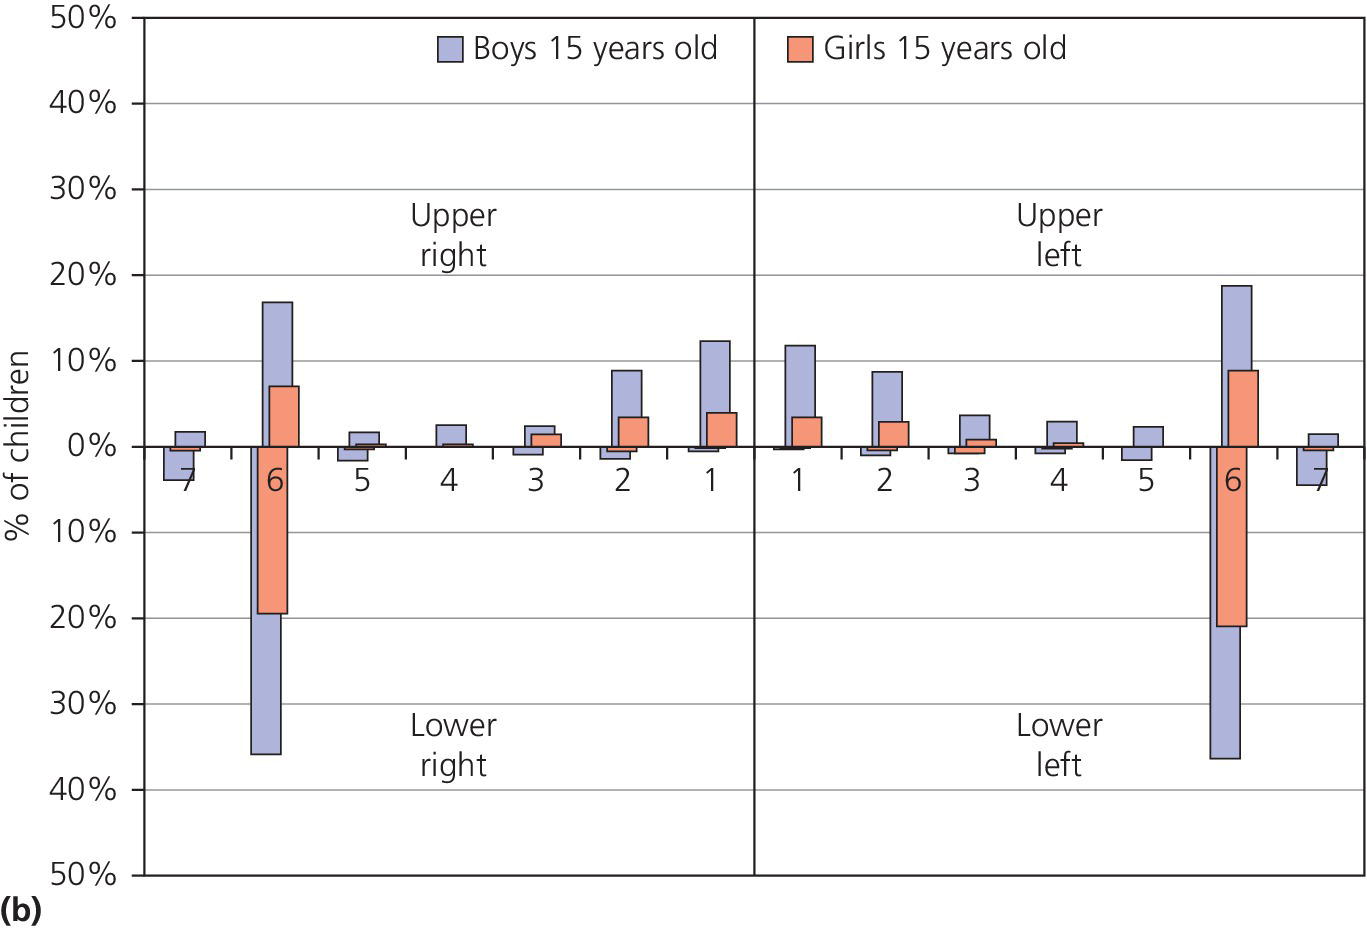 4 Quadrant bar graph displaying the percentage of boys and girls with dental erosion at 15 years of age. Bars for boys are higher than those for girls, particularly in the lower left and right teeth.